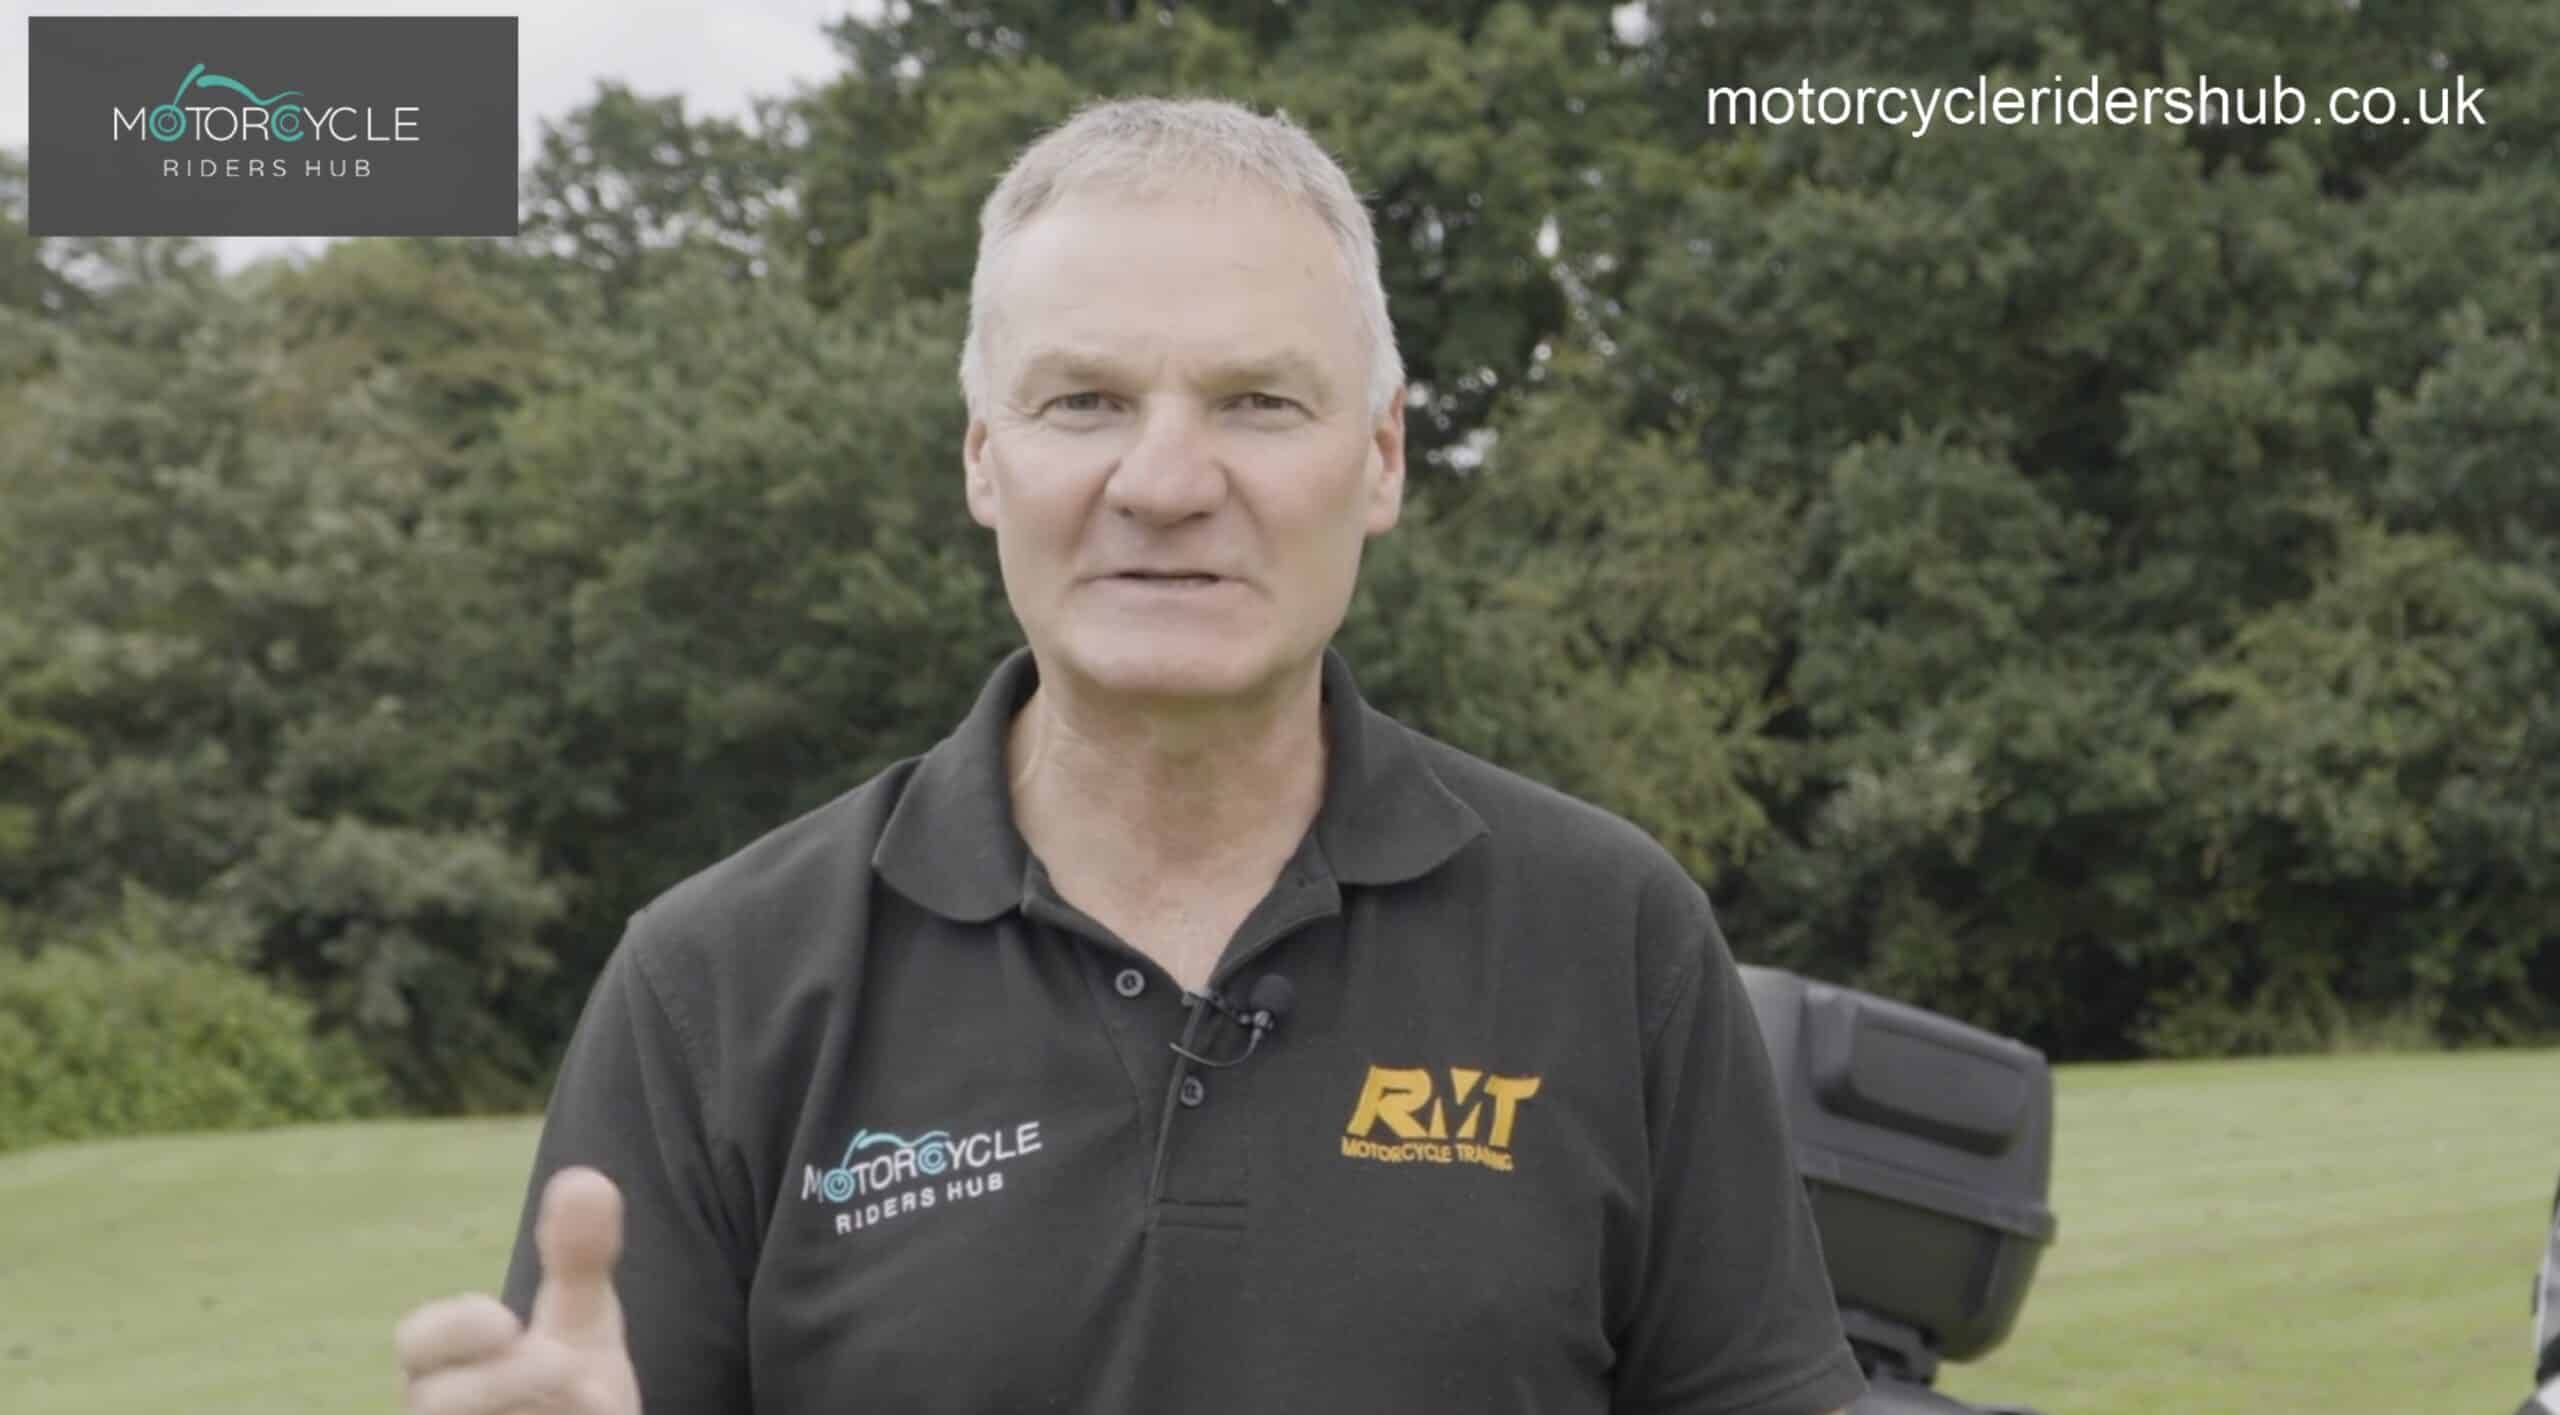 Module 2 Motorcycle Test Faults - Understanding Rider Faults and Fails